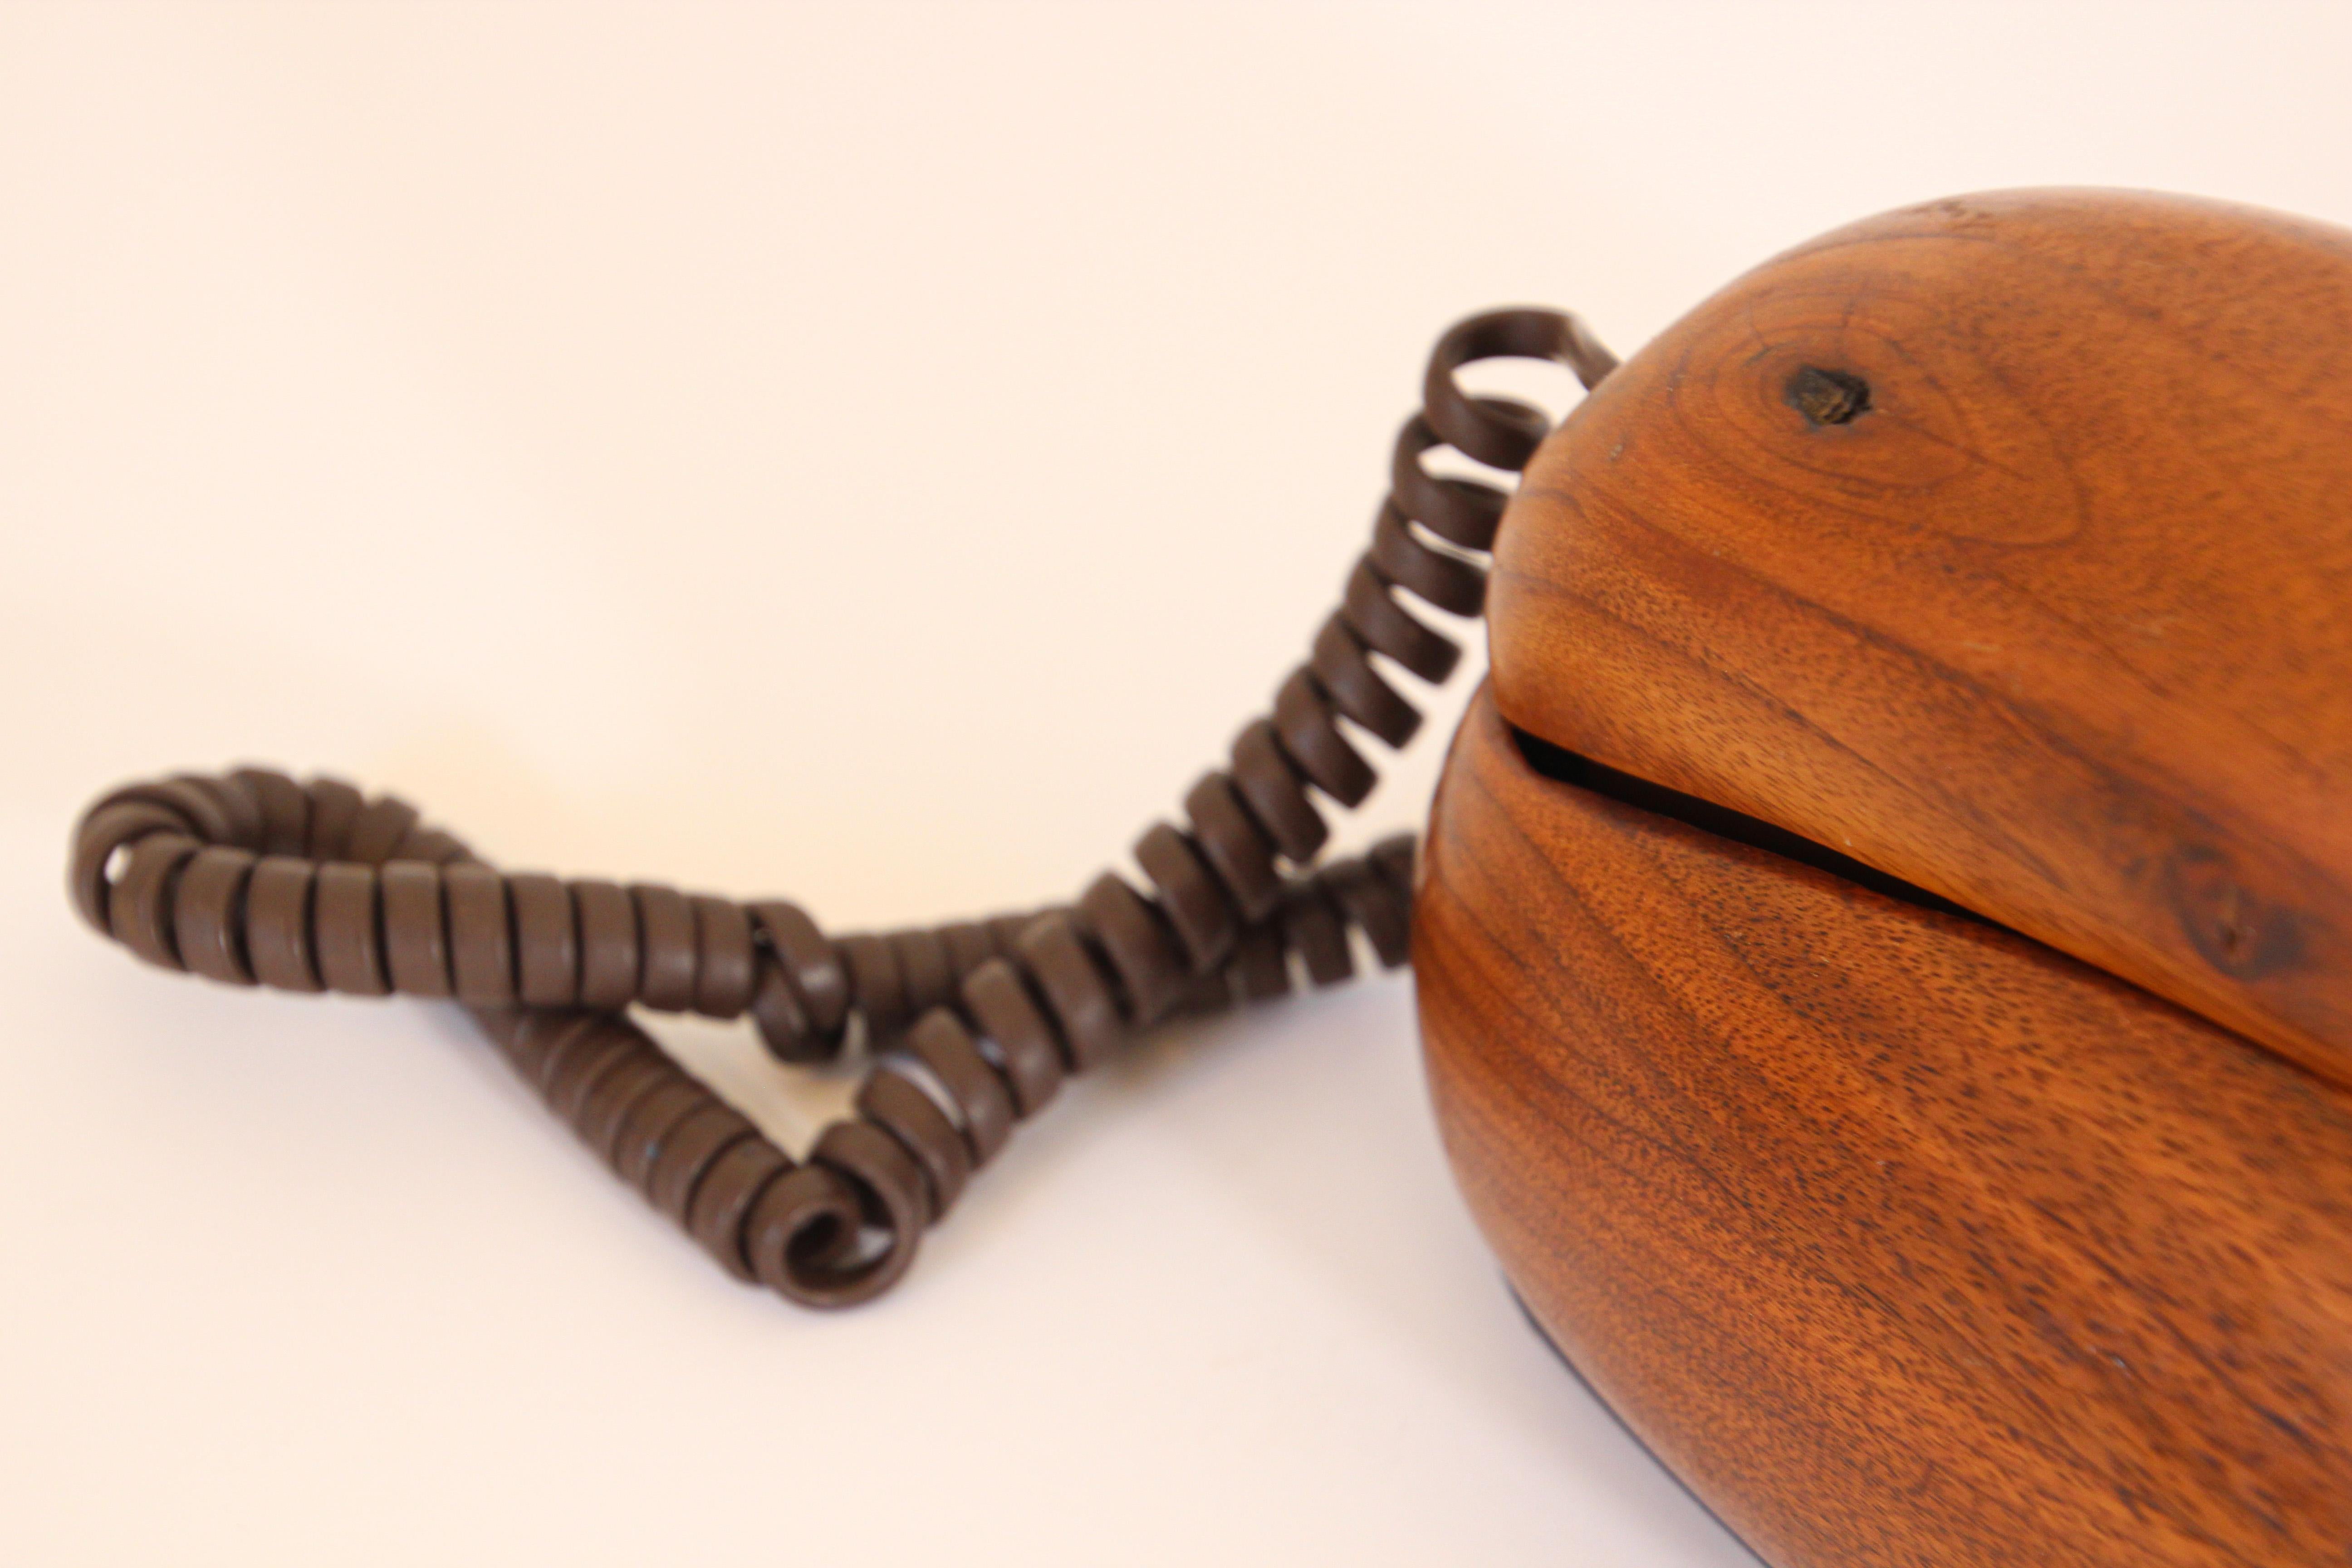 Hand-Crafted Vintage Telephone Covered in Wood, Organic Modern Style Retro Phone